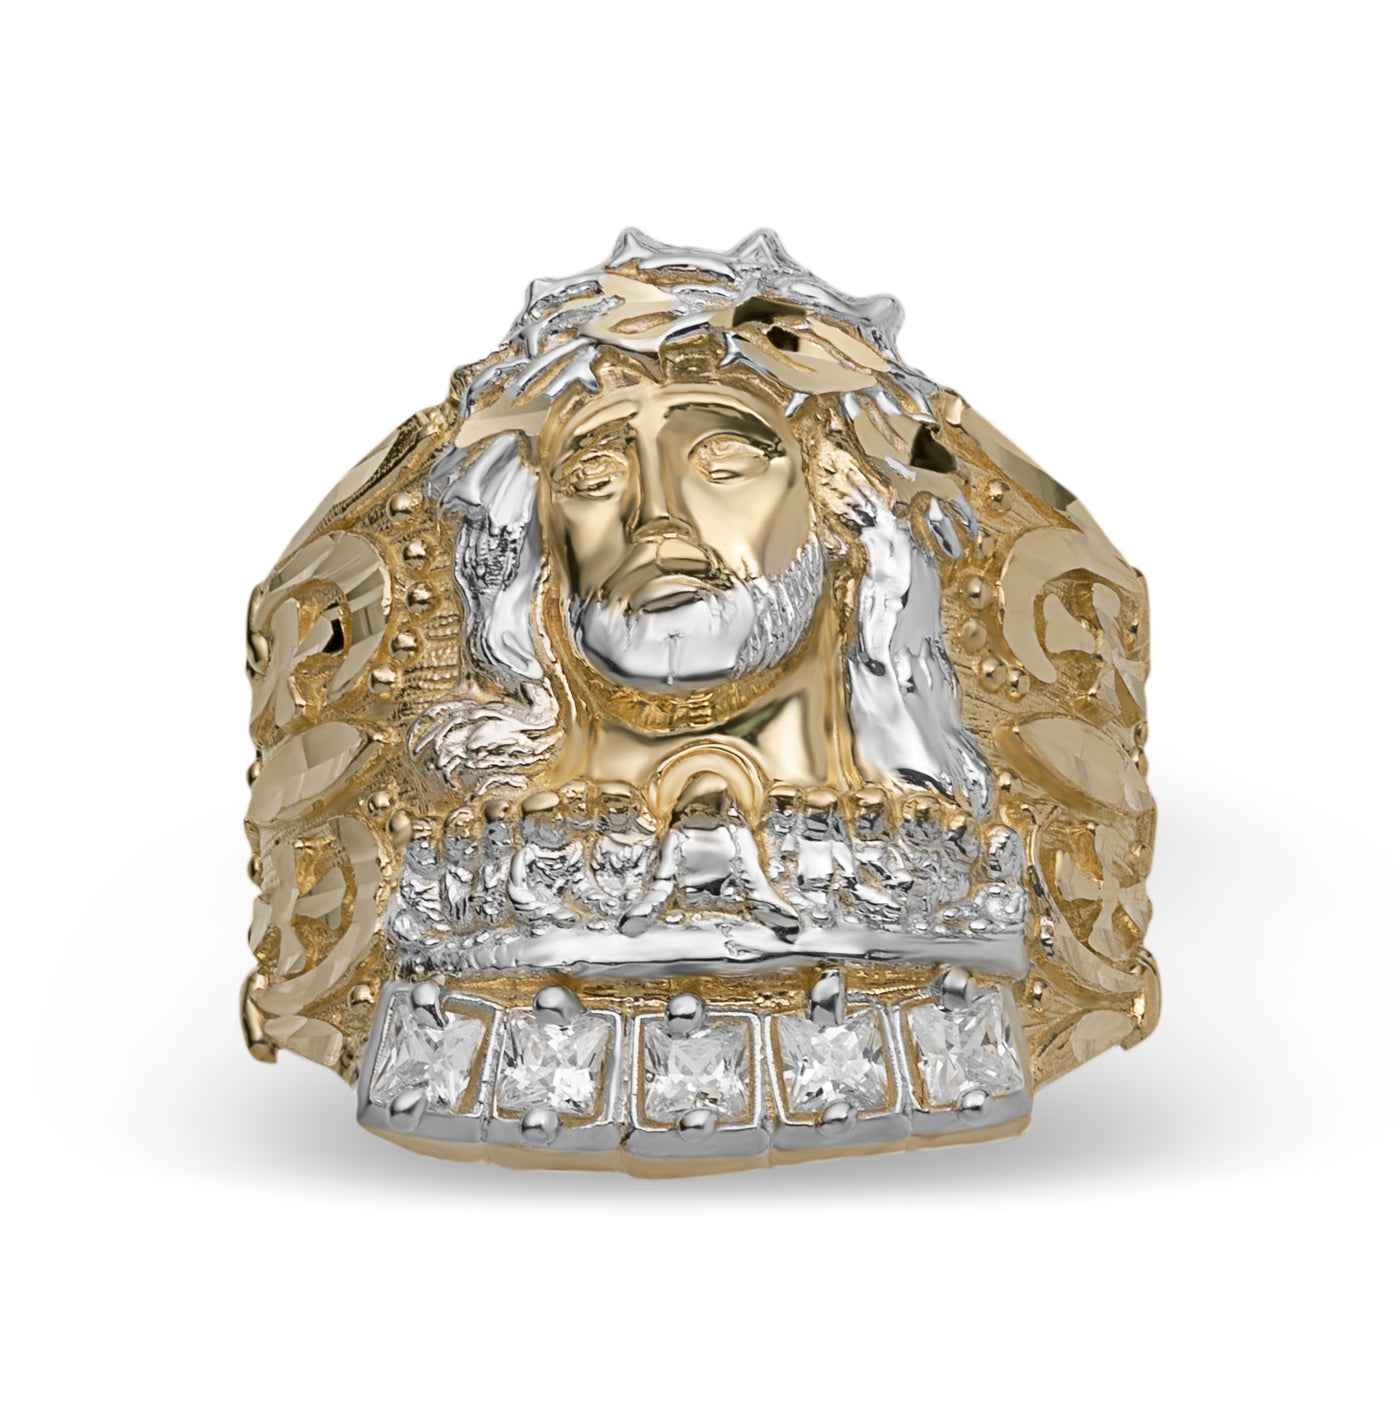 18K Gold Plated Jesus Head Ring Protect For Men Hip Hop Style With  Stainless Steel Cross Design From Efwmz, $14.52 | DHgate.Com